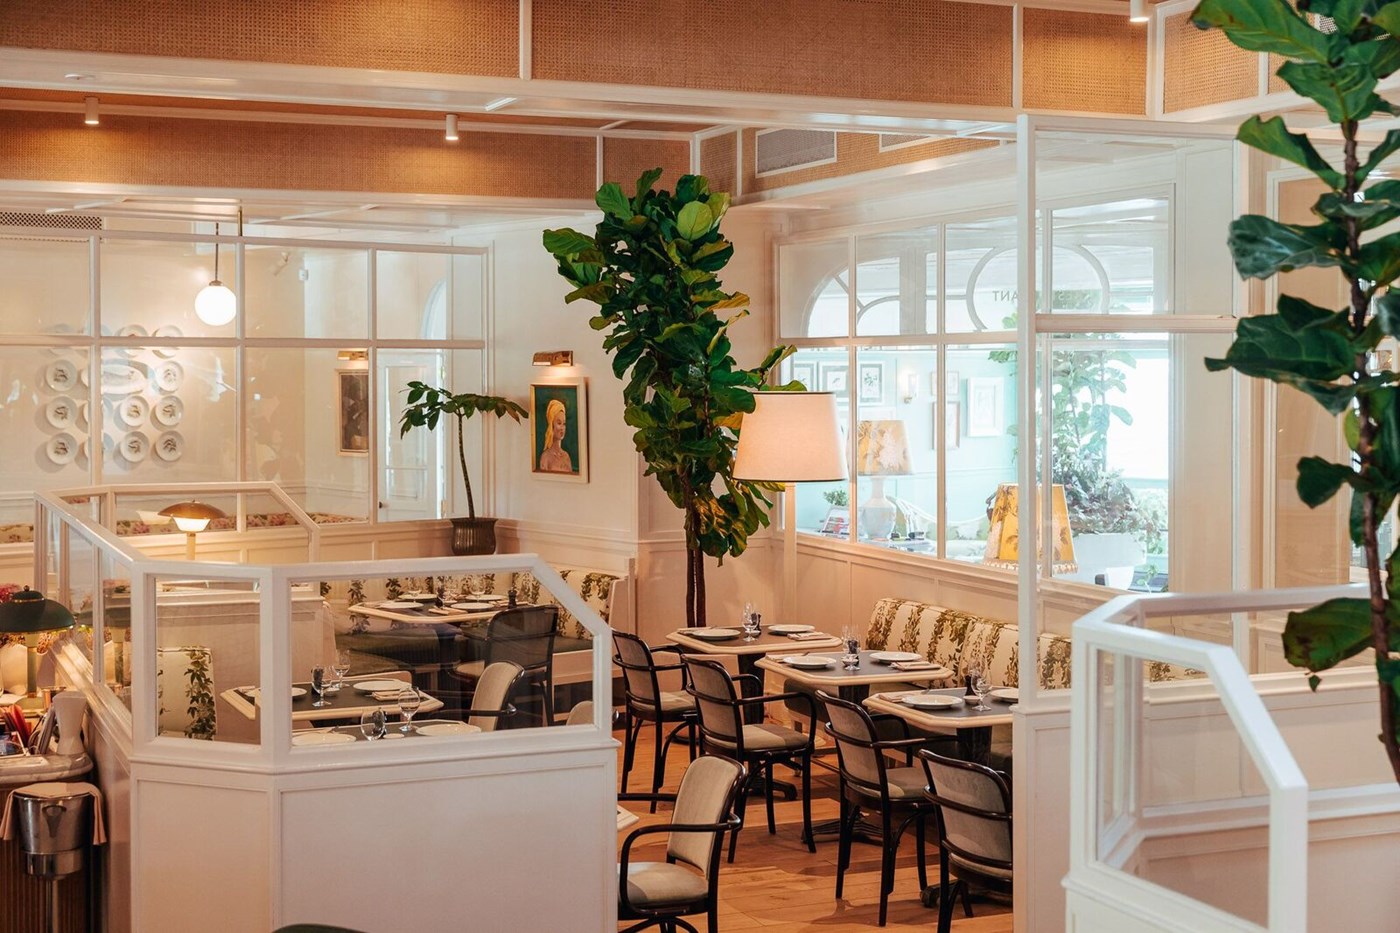 Interior dining room of Bert's Bar & Brasserie with white walls, indoor greenery and neutral colour palette